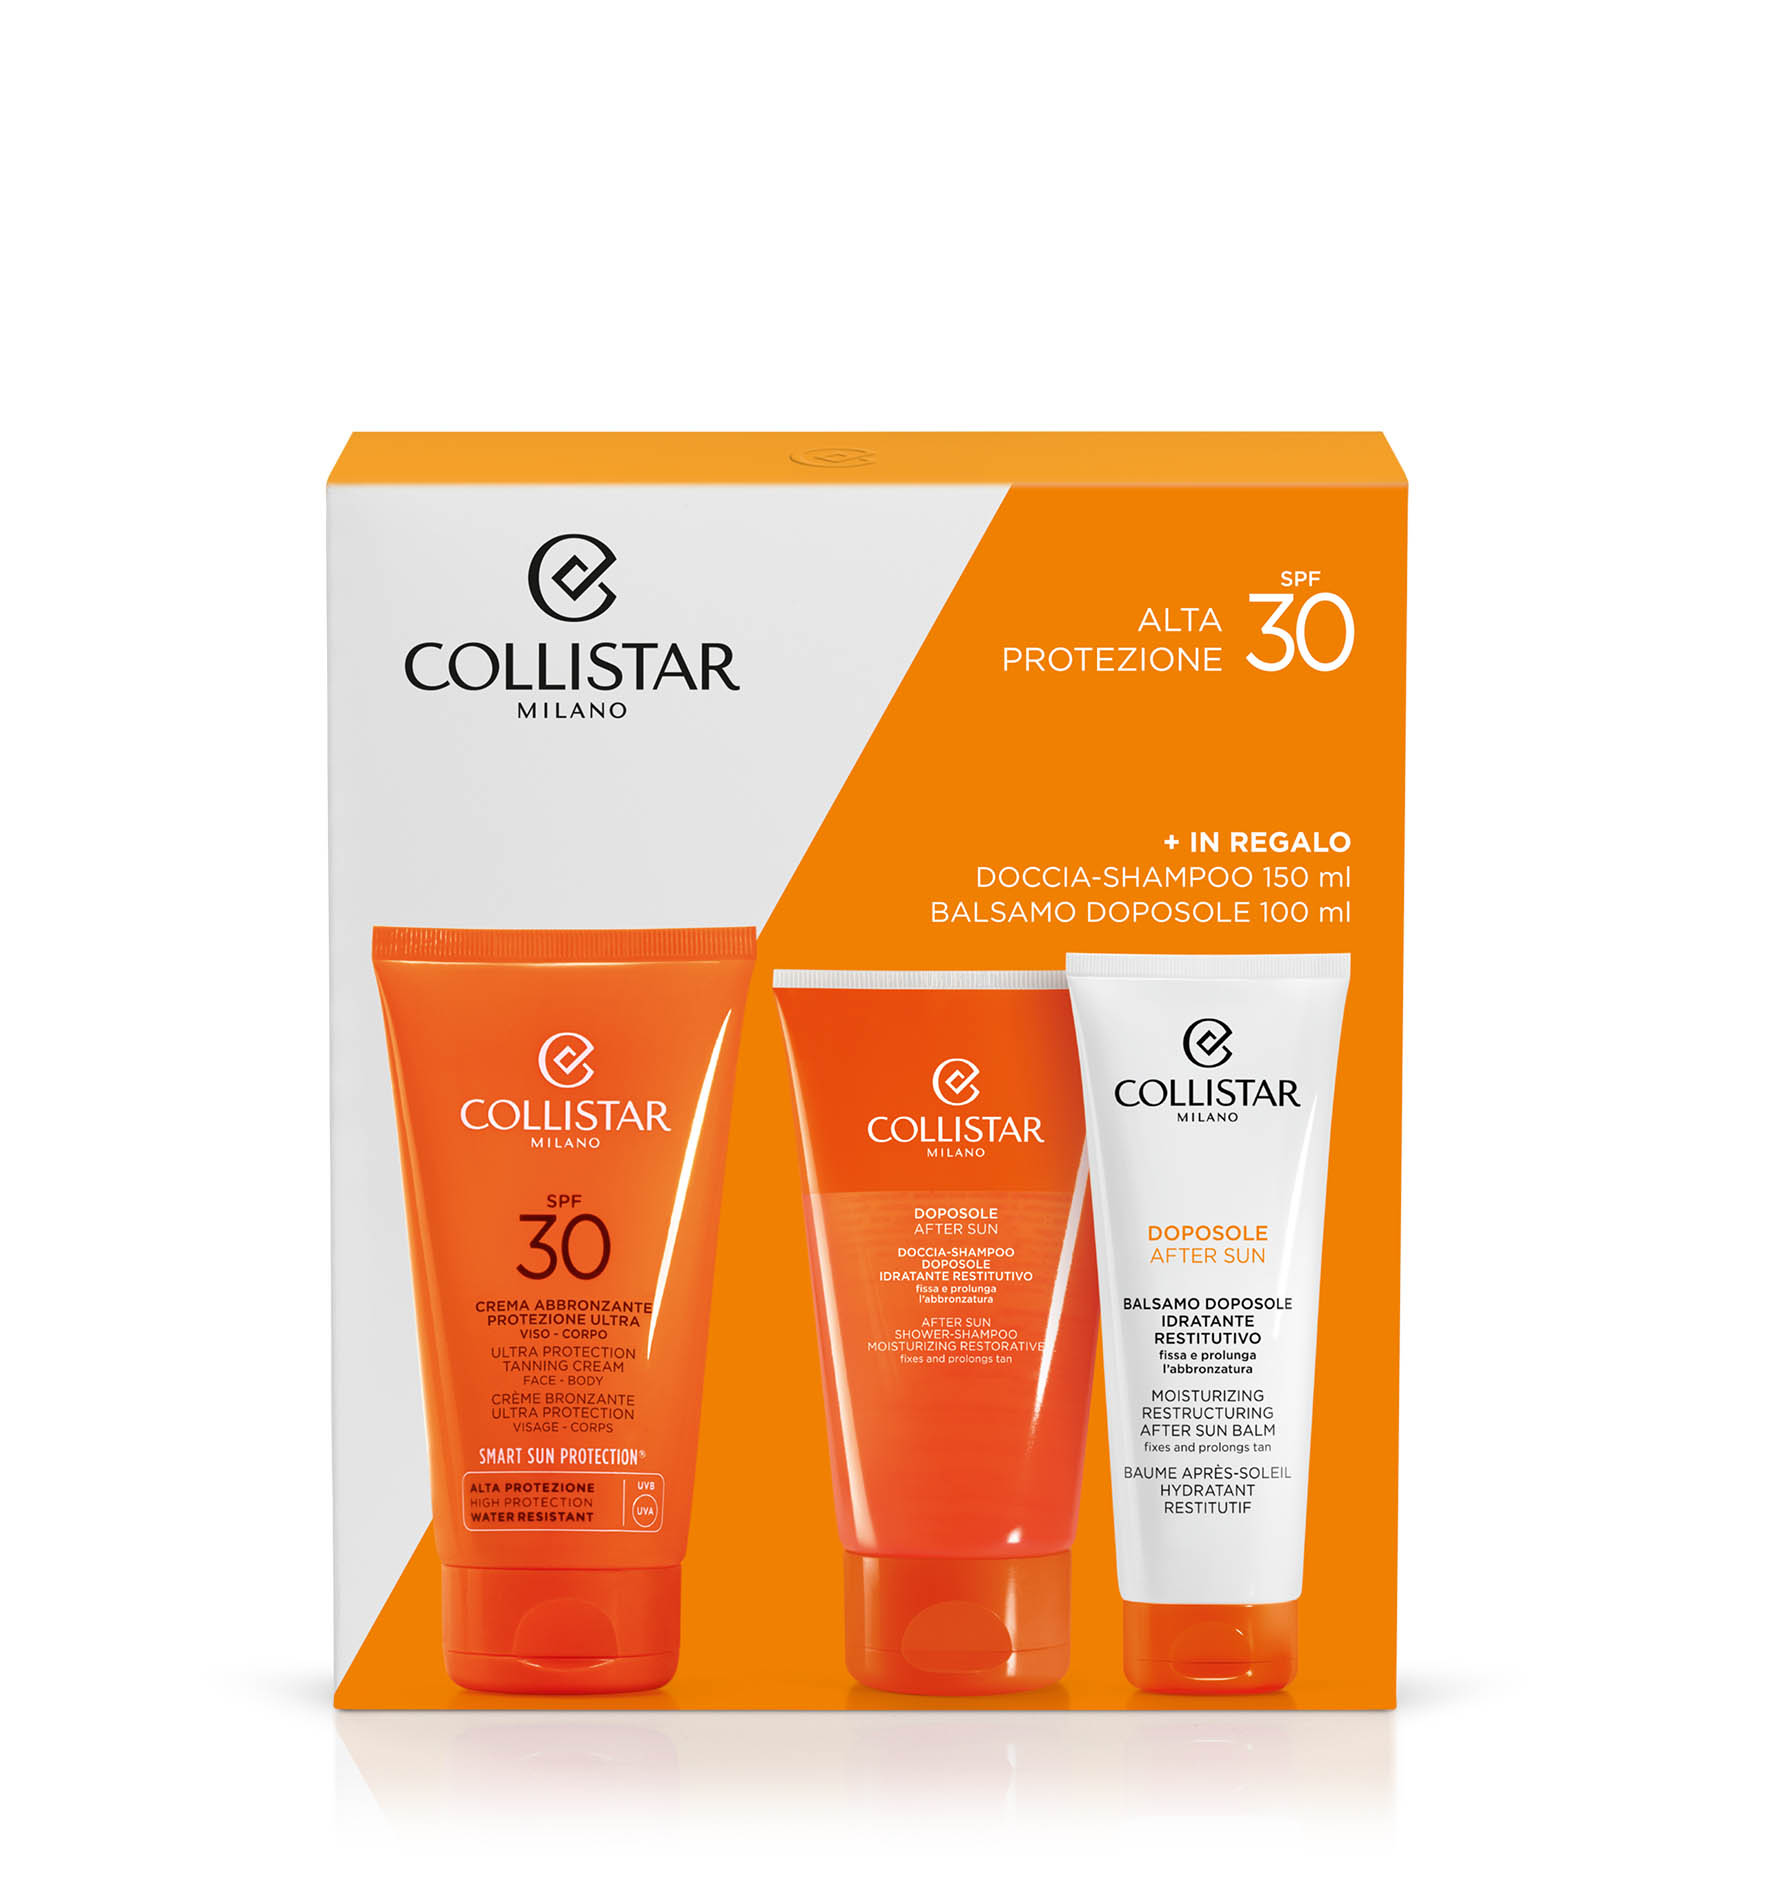 SET ULTRA PROTECTION TANNING CREAM FACE-BODY SPF 30 - PROMOTIONS | Collistar - Shop Online Ufficiale